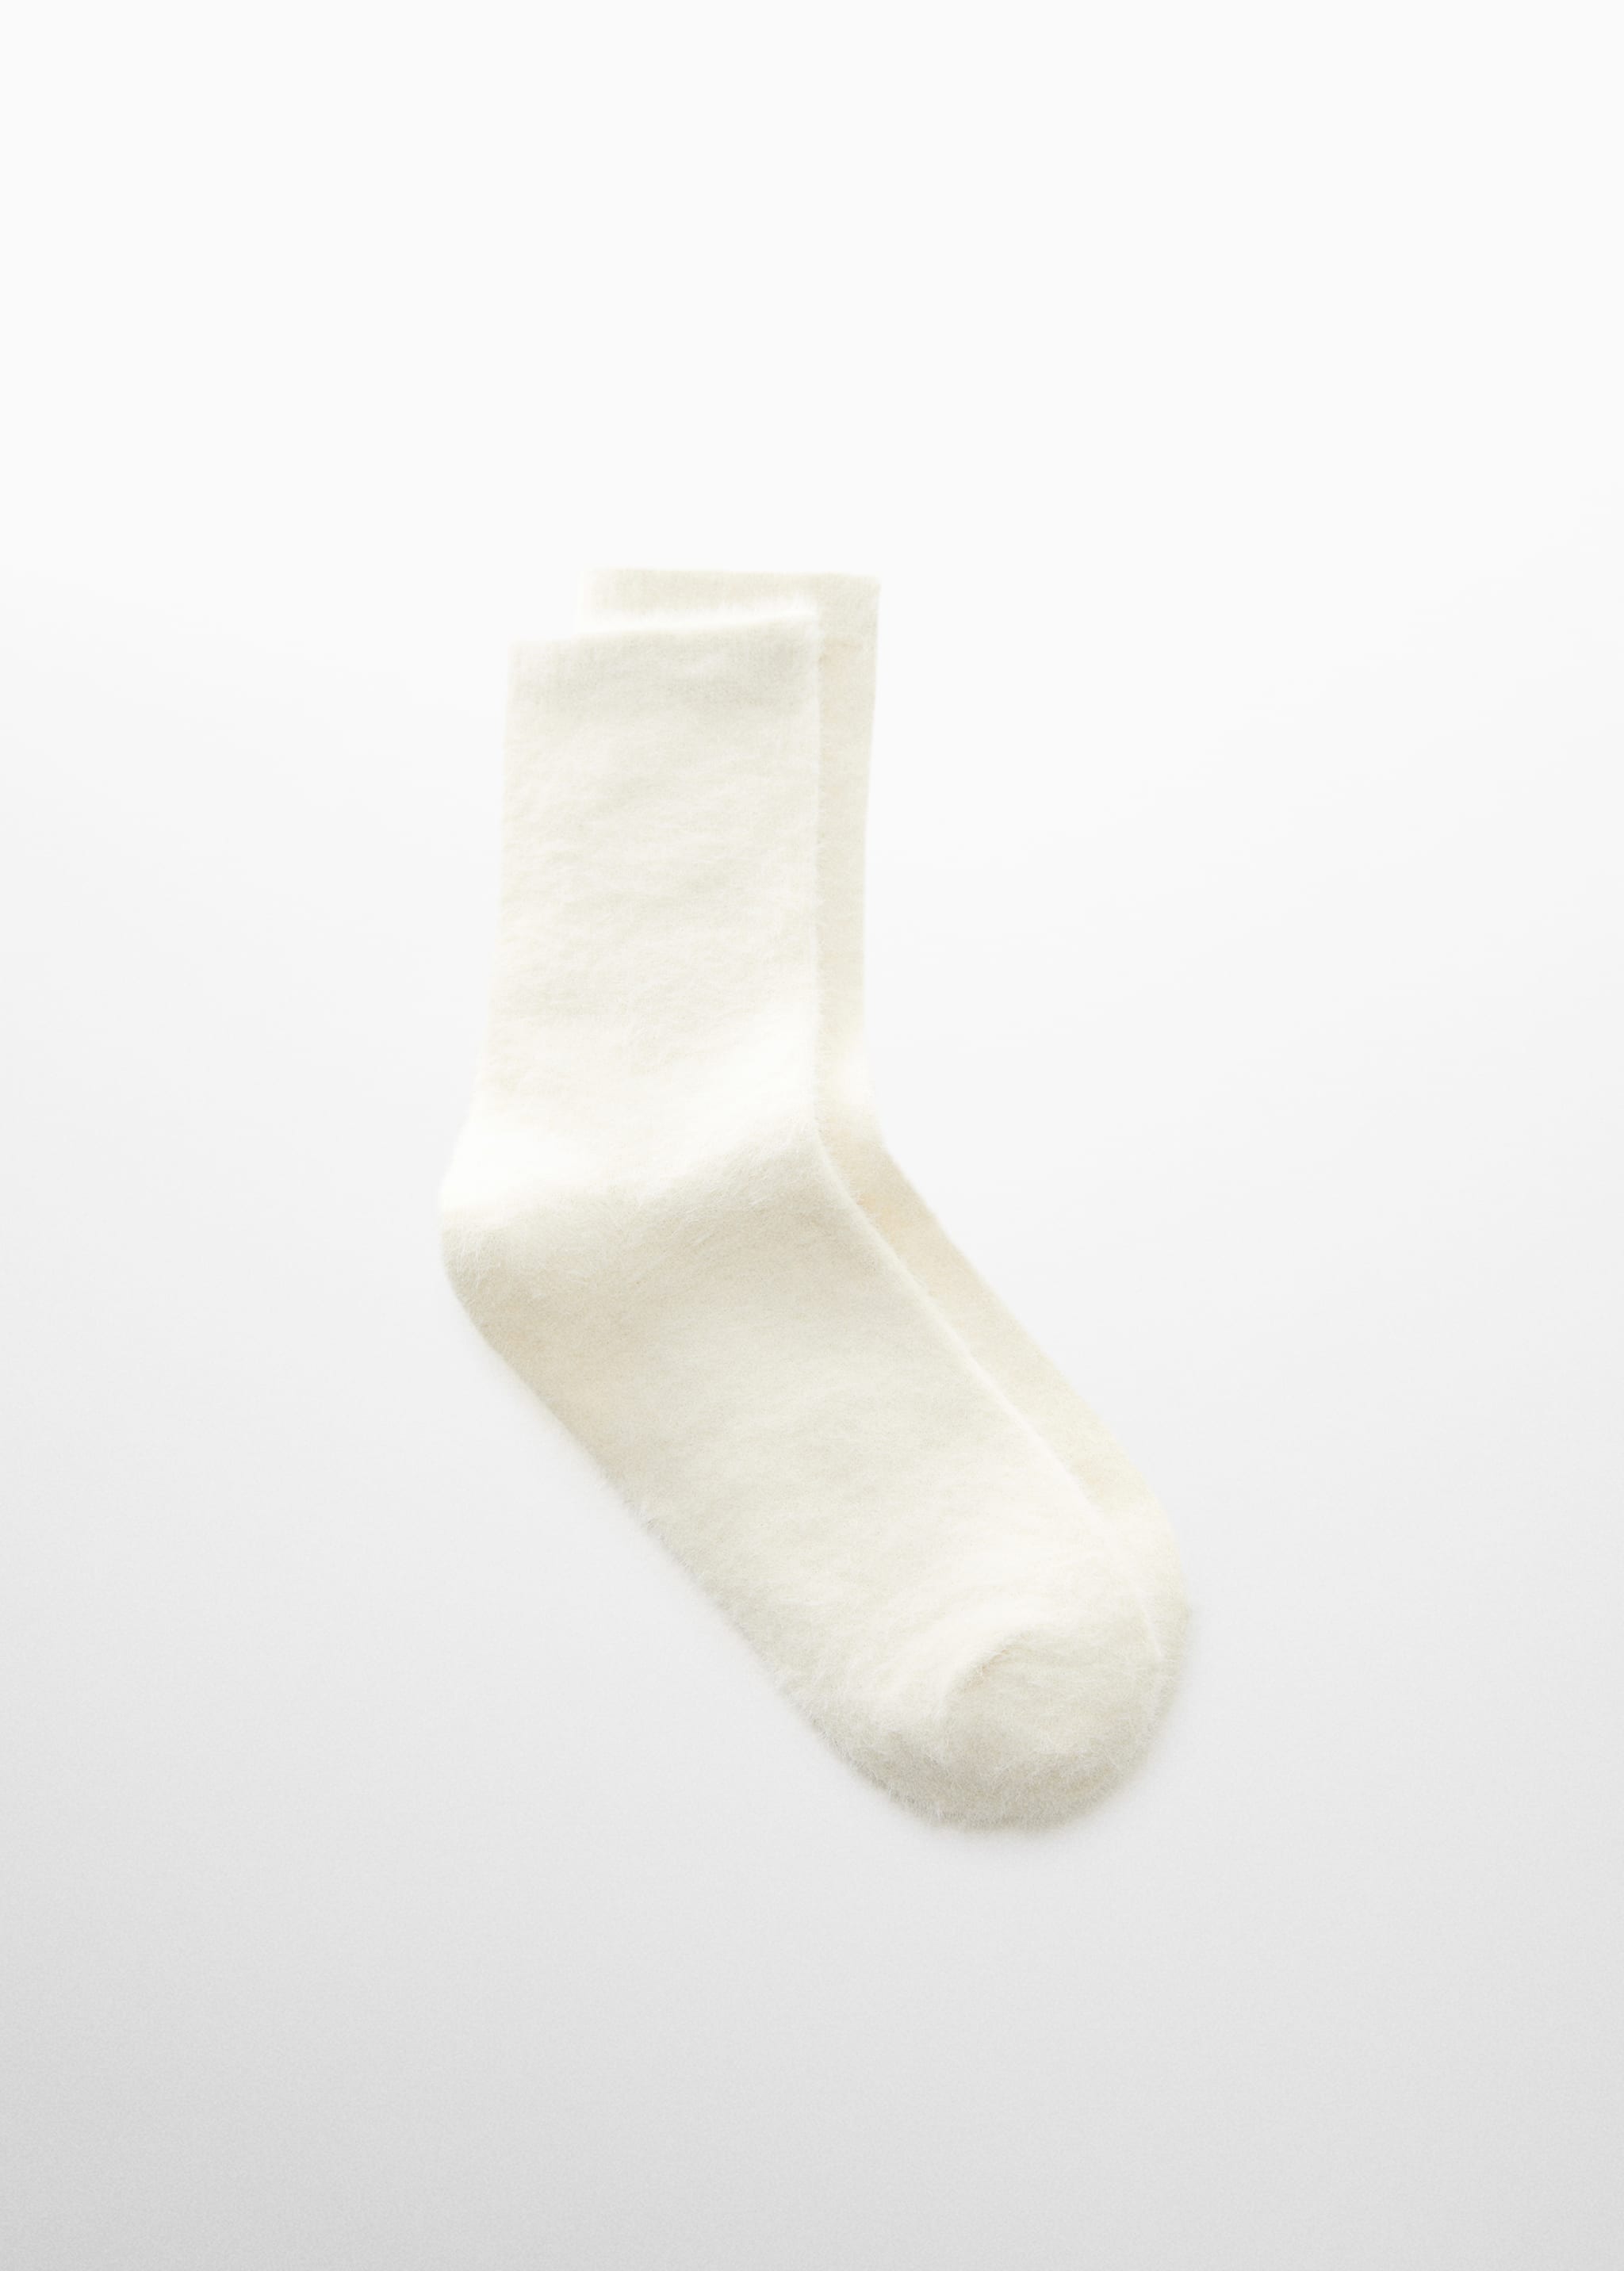 Soft finish socks - Article without model